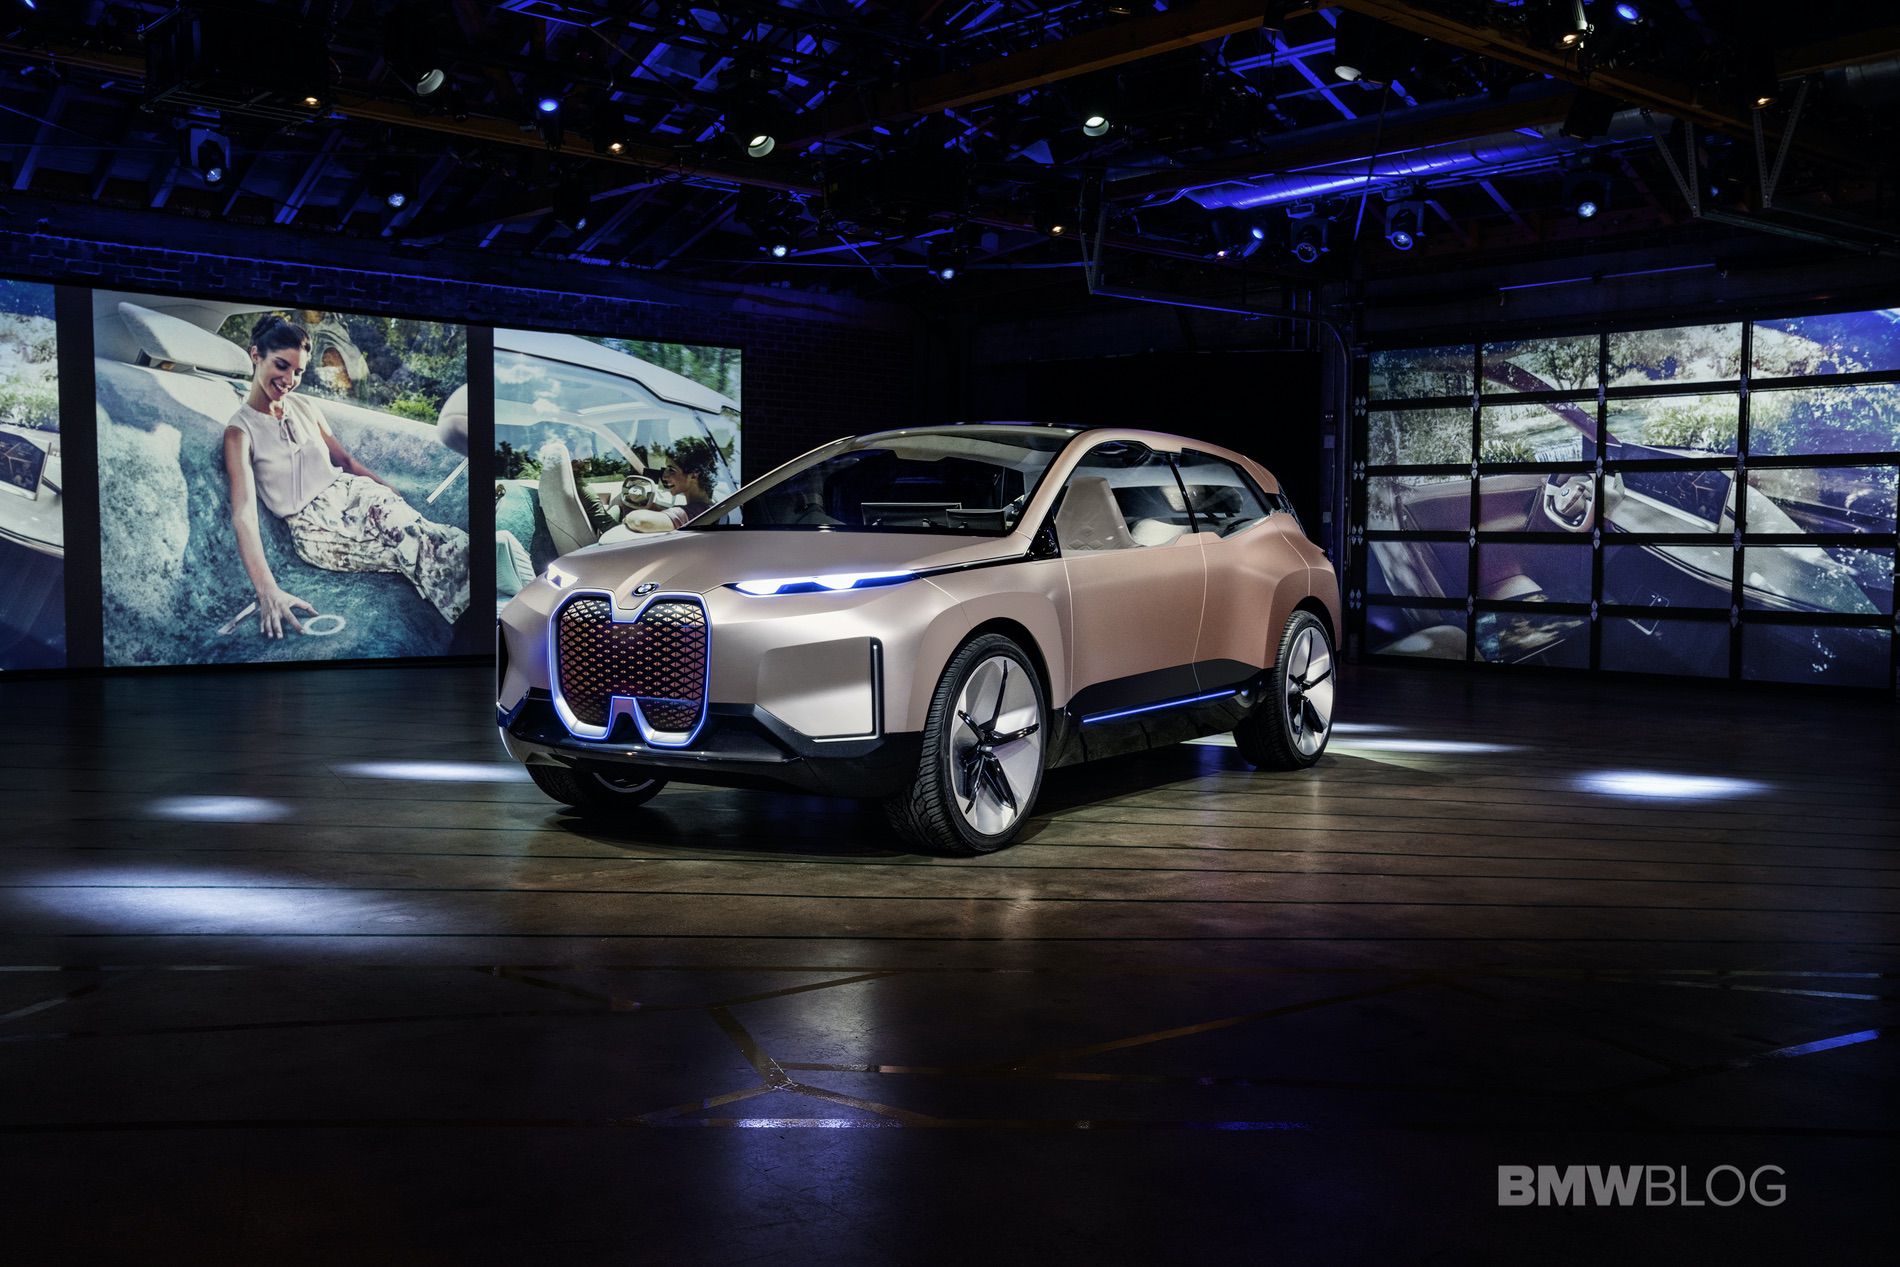 Is BMW i Division’s biggest problem its styling?